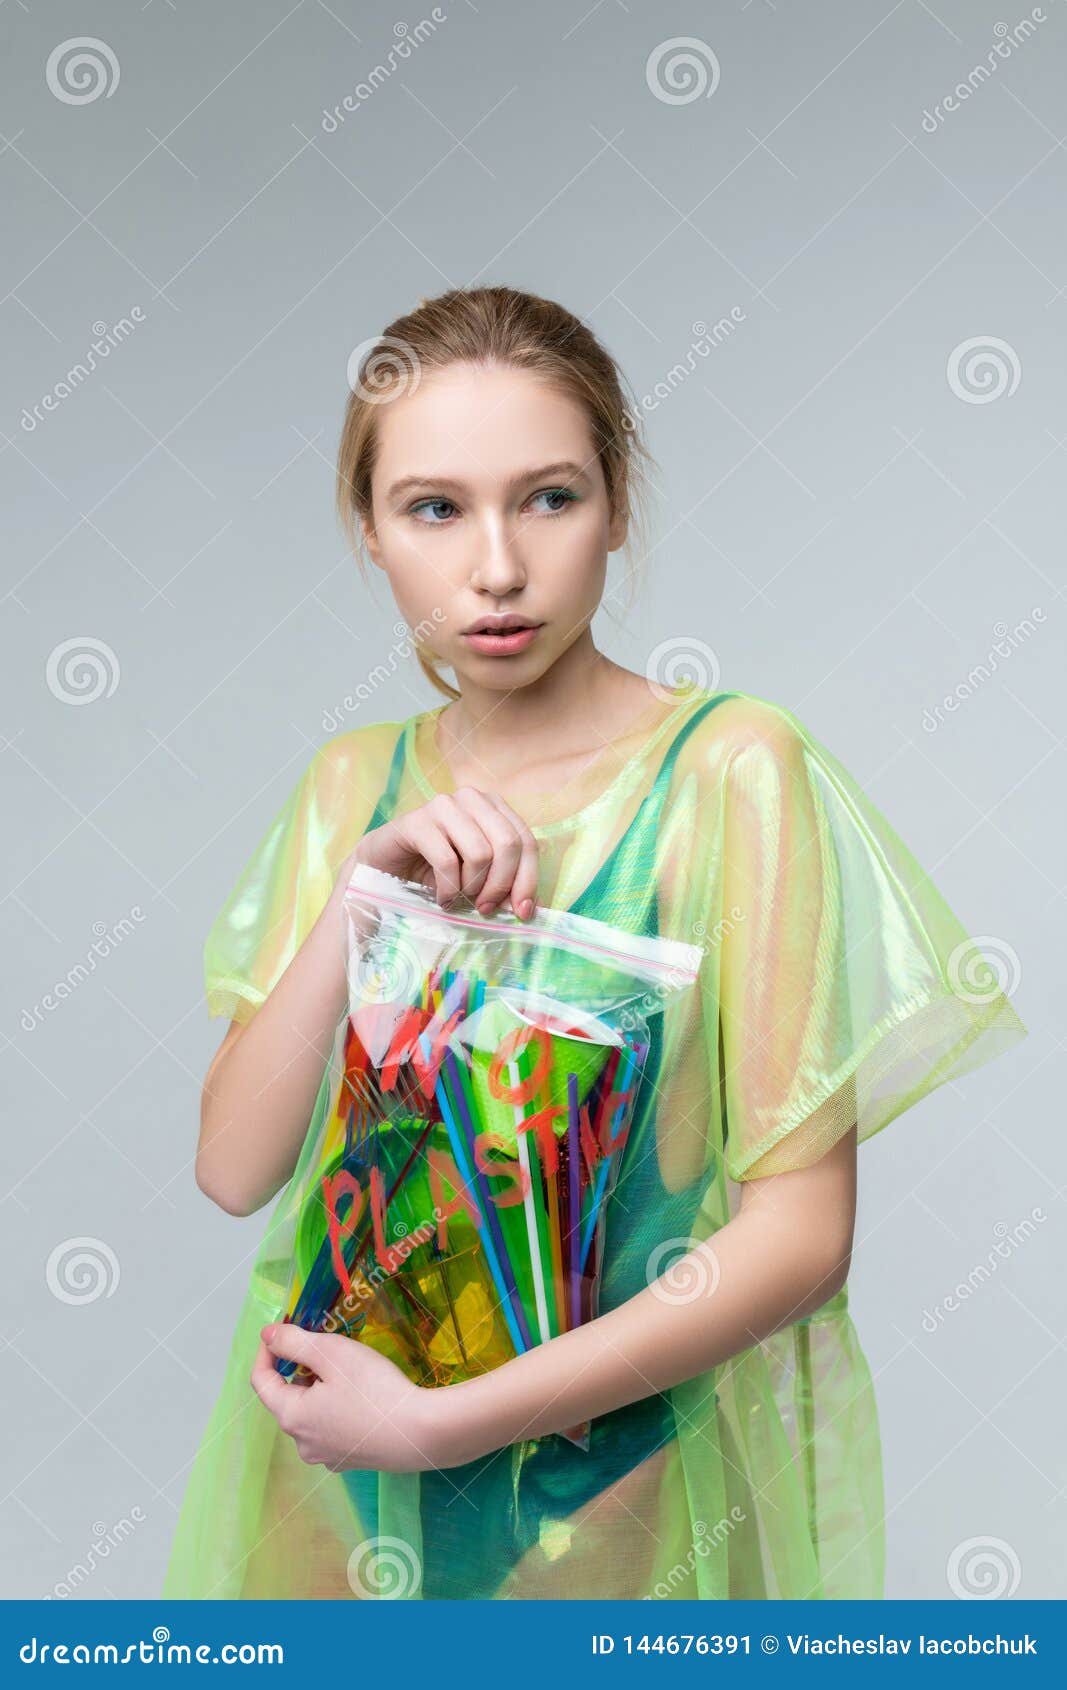 model posing in plastic clothes taking part in social campaign